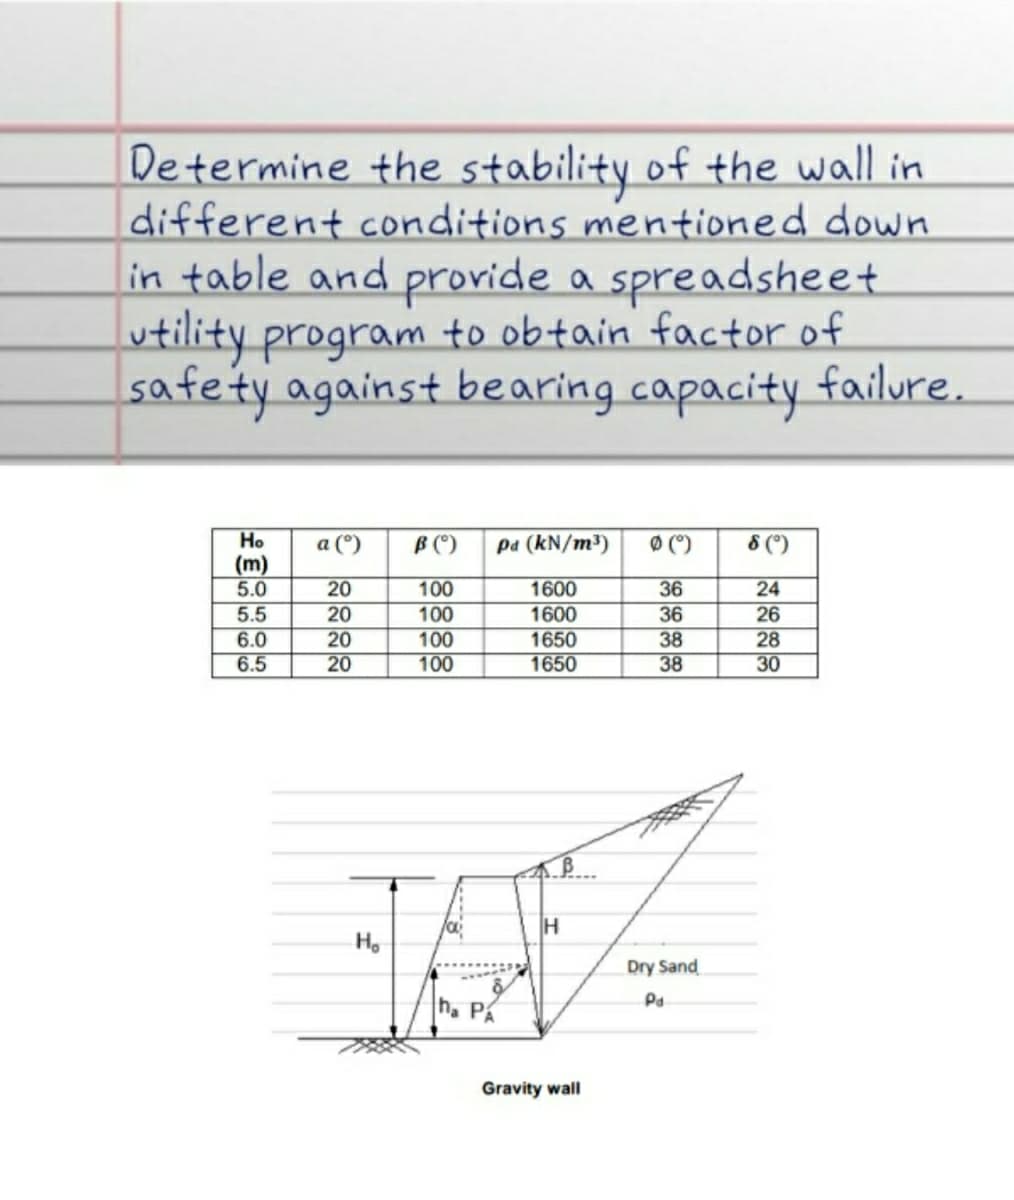 Determine the stability of the wall in
different conditions mentioned down
in table and provide a spreadsheet
utility program to obtain factor of
safety against bearing capacity failure.
Ho
(m)
5.0
5.5
a (°)
B(C)
pa (kN/m³)
Ø ()
8 (°)
1600
1600
20
100
36
24
20
100
100
100
36
6.0
6.5
26
28
30
20
1650
38
38
20
1650
H
Ho
Dry Sand
Pa
h. PA
Gravity wall
